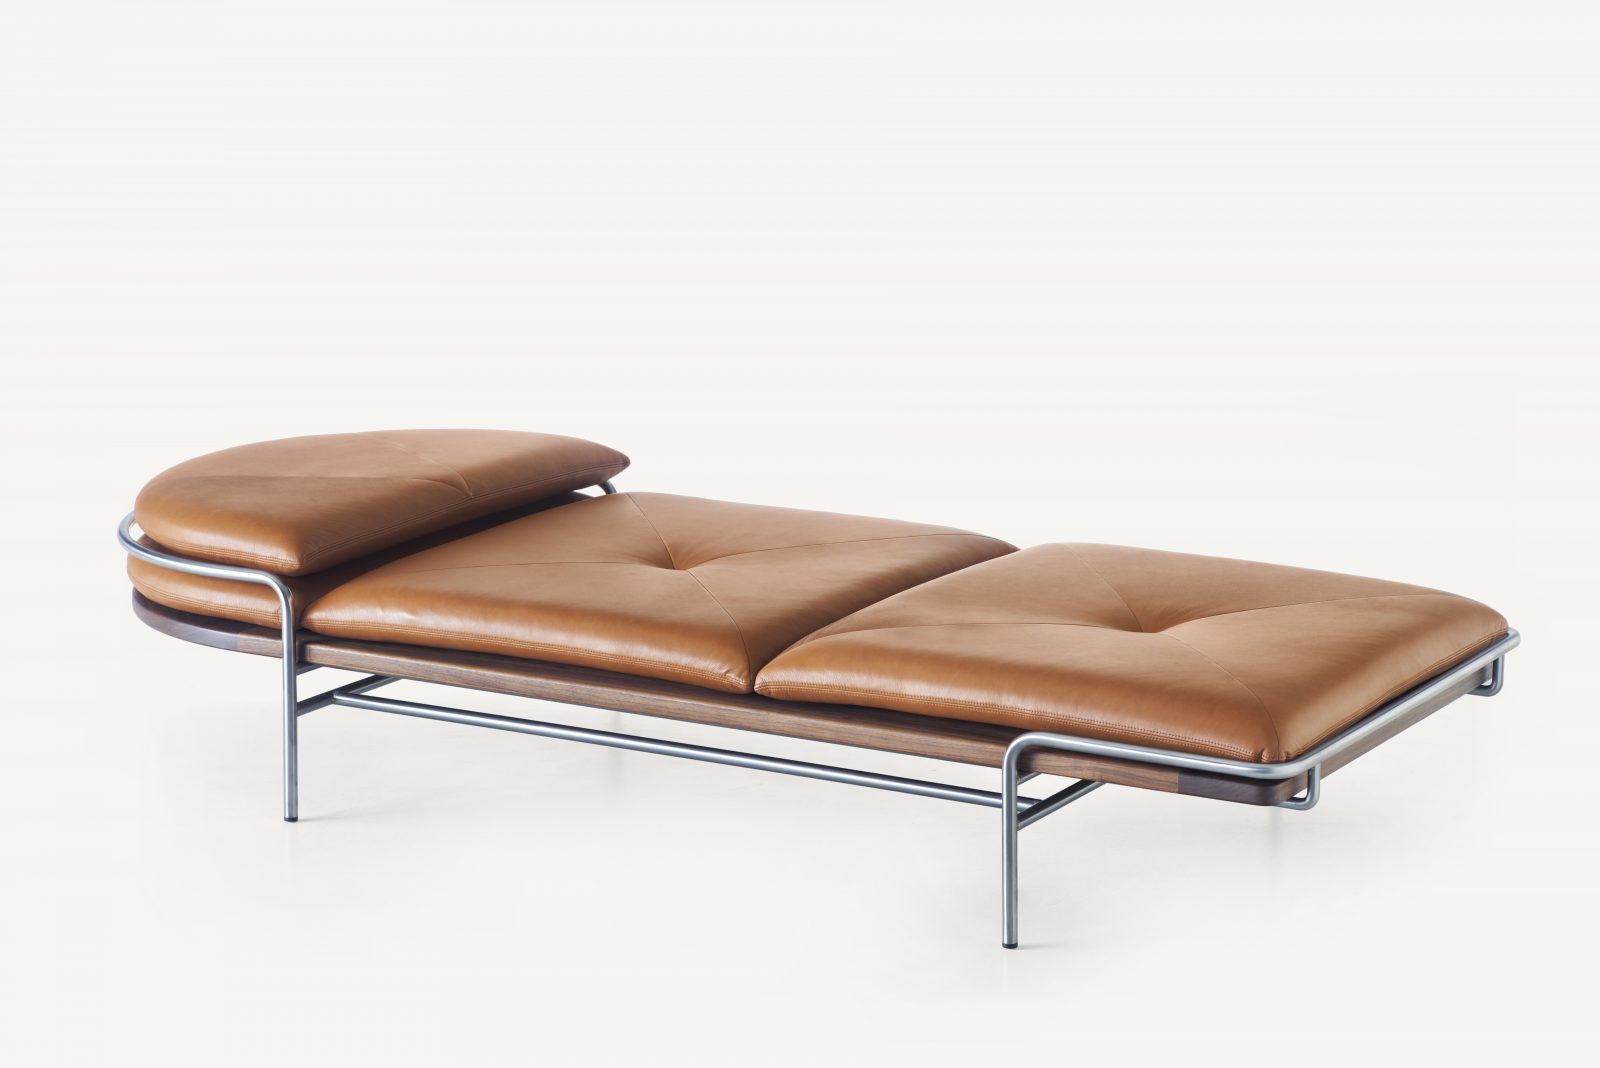 BassamFellows CB-457 Geometric Daybed in Walnut and Satin Nickel, 3:4 front, credit MARCO FAVALI